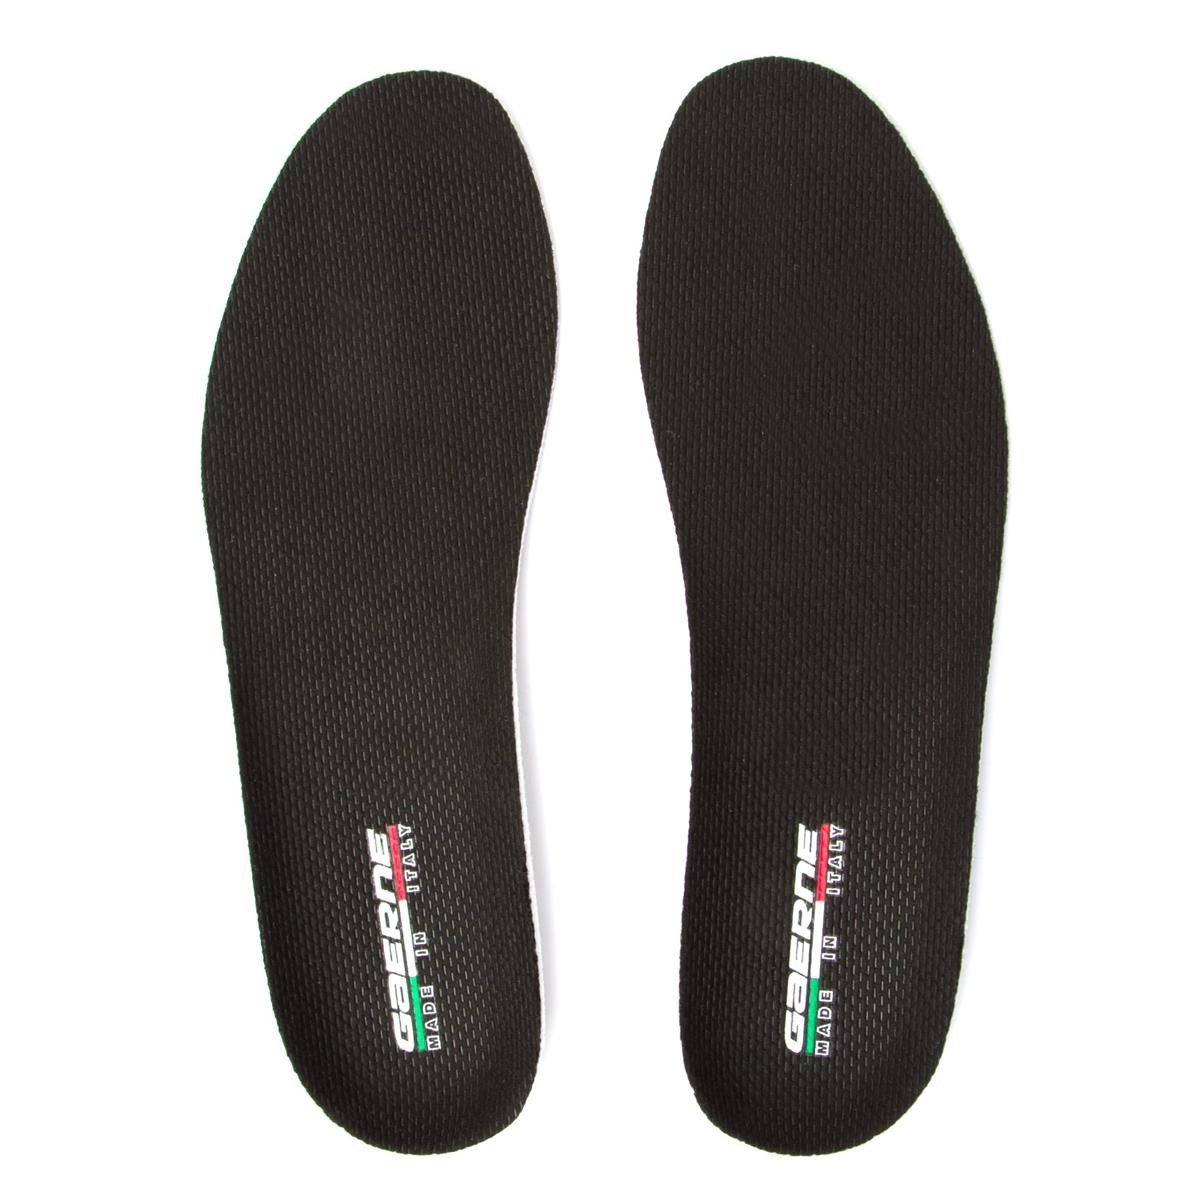 Gaerne Replacement Insole SG 10/Fastback Black